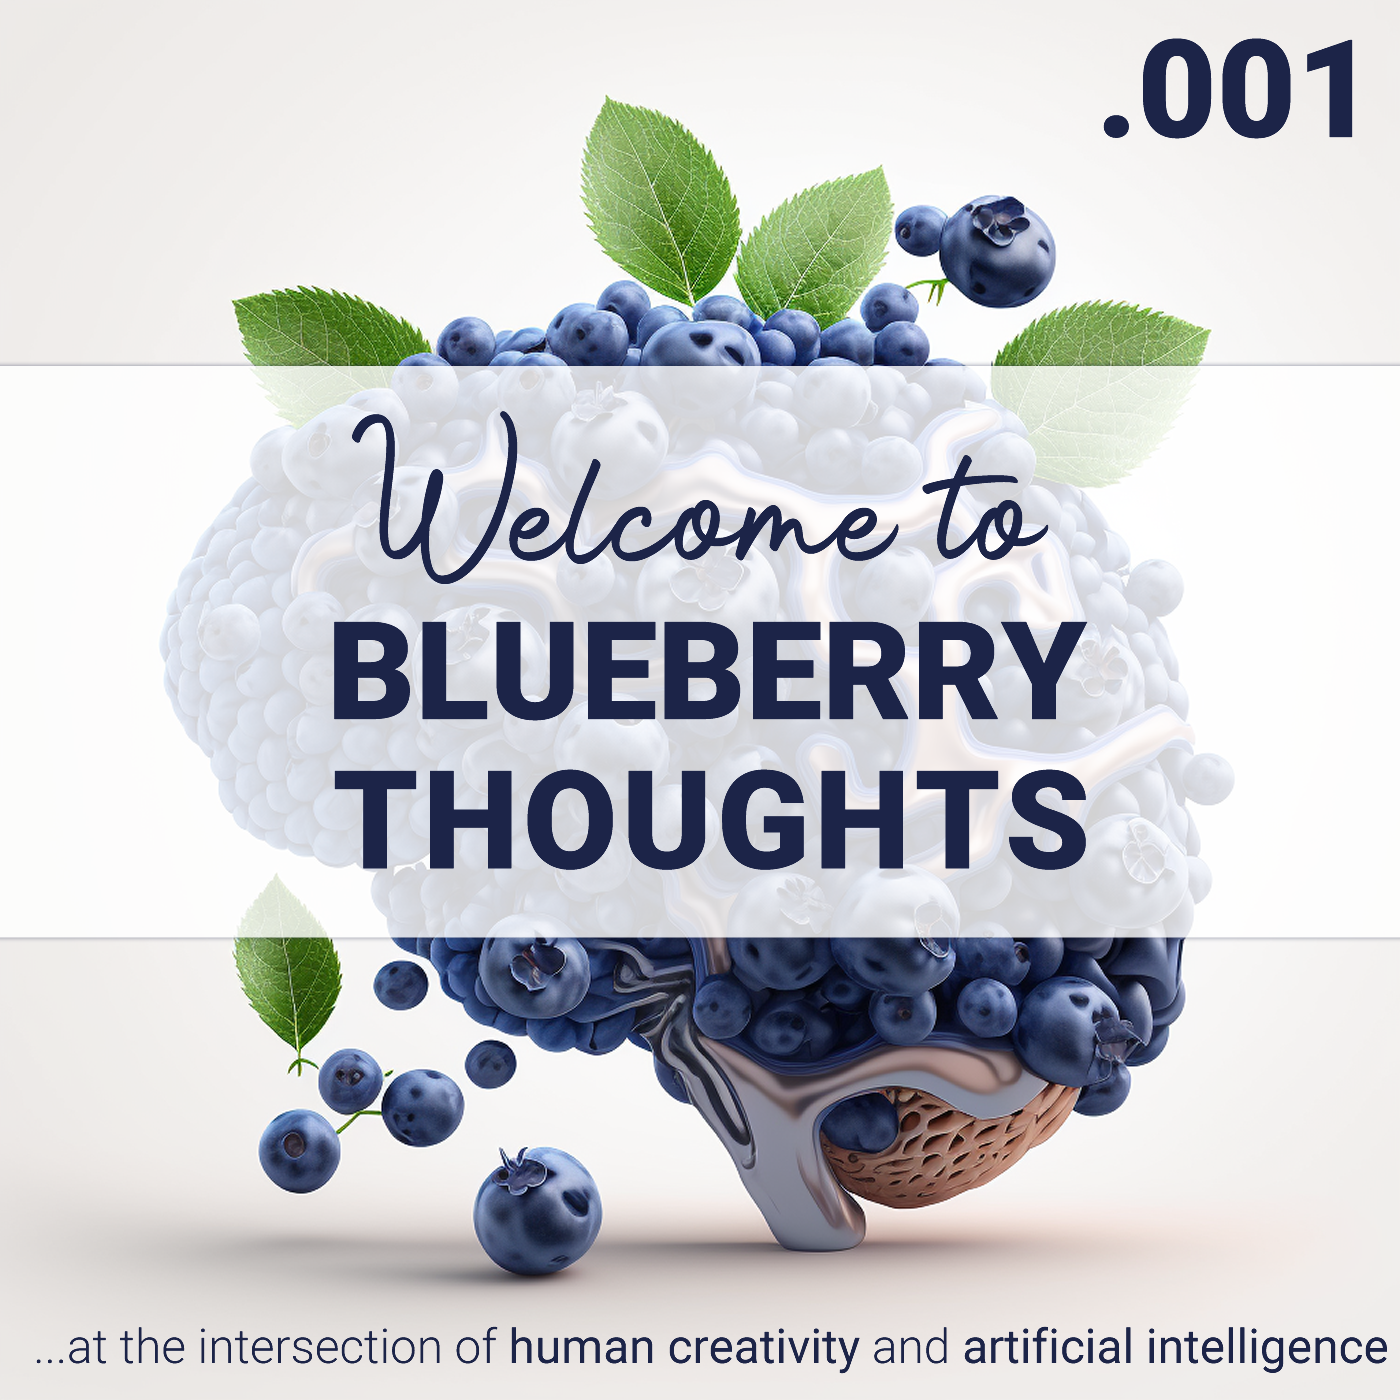 Introducing the Blueberry Thoughts Podcast